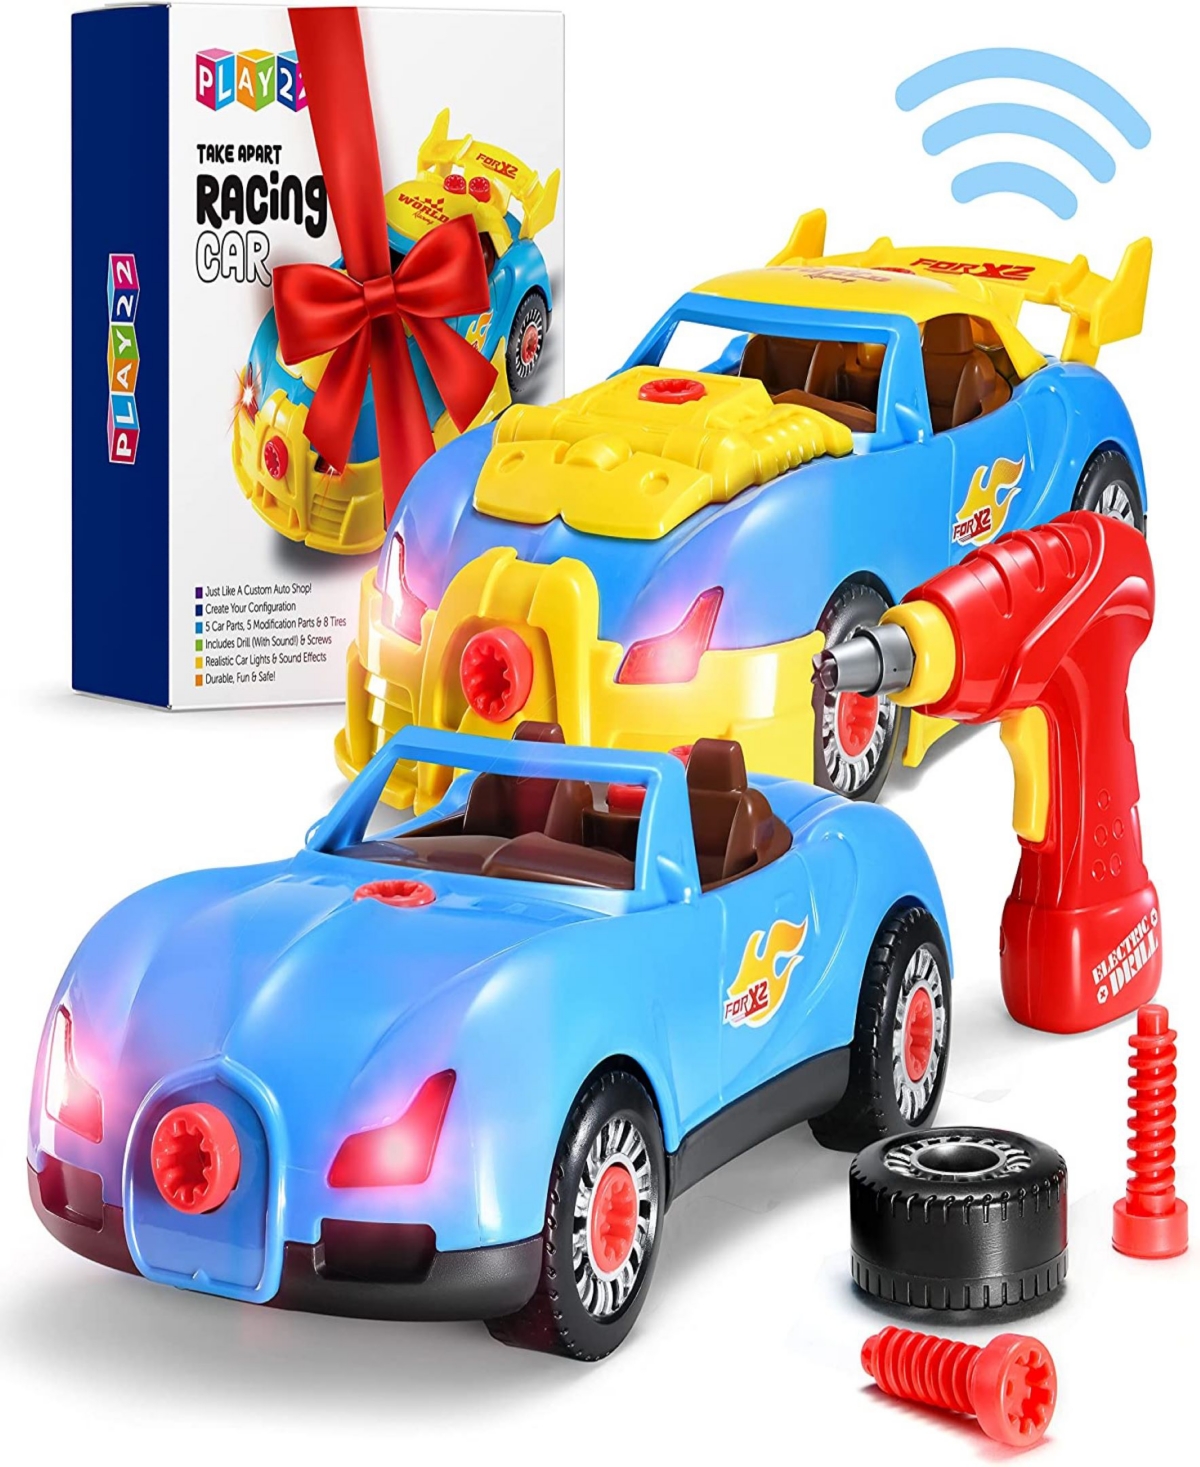 Play22 Take Apart Racing Car 30 Piece Set With Drill, Engine Sounds Lights In Multicolor